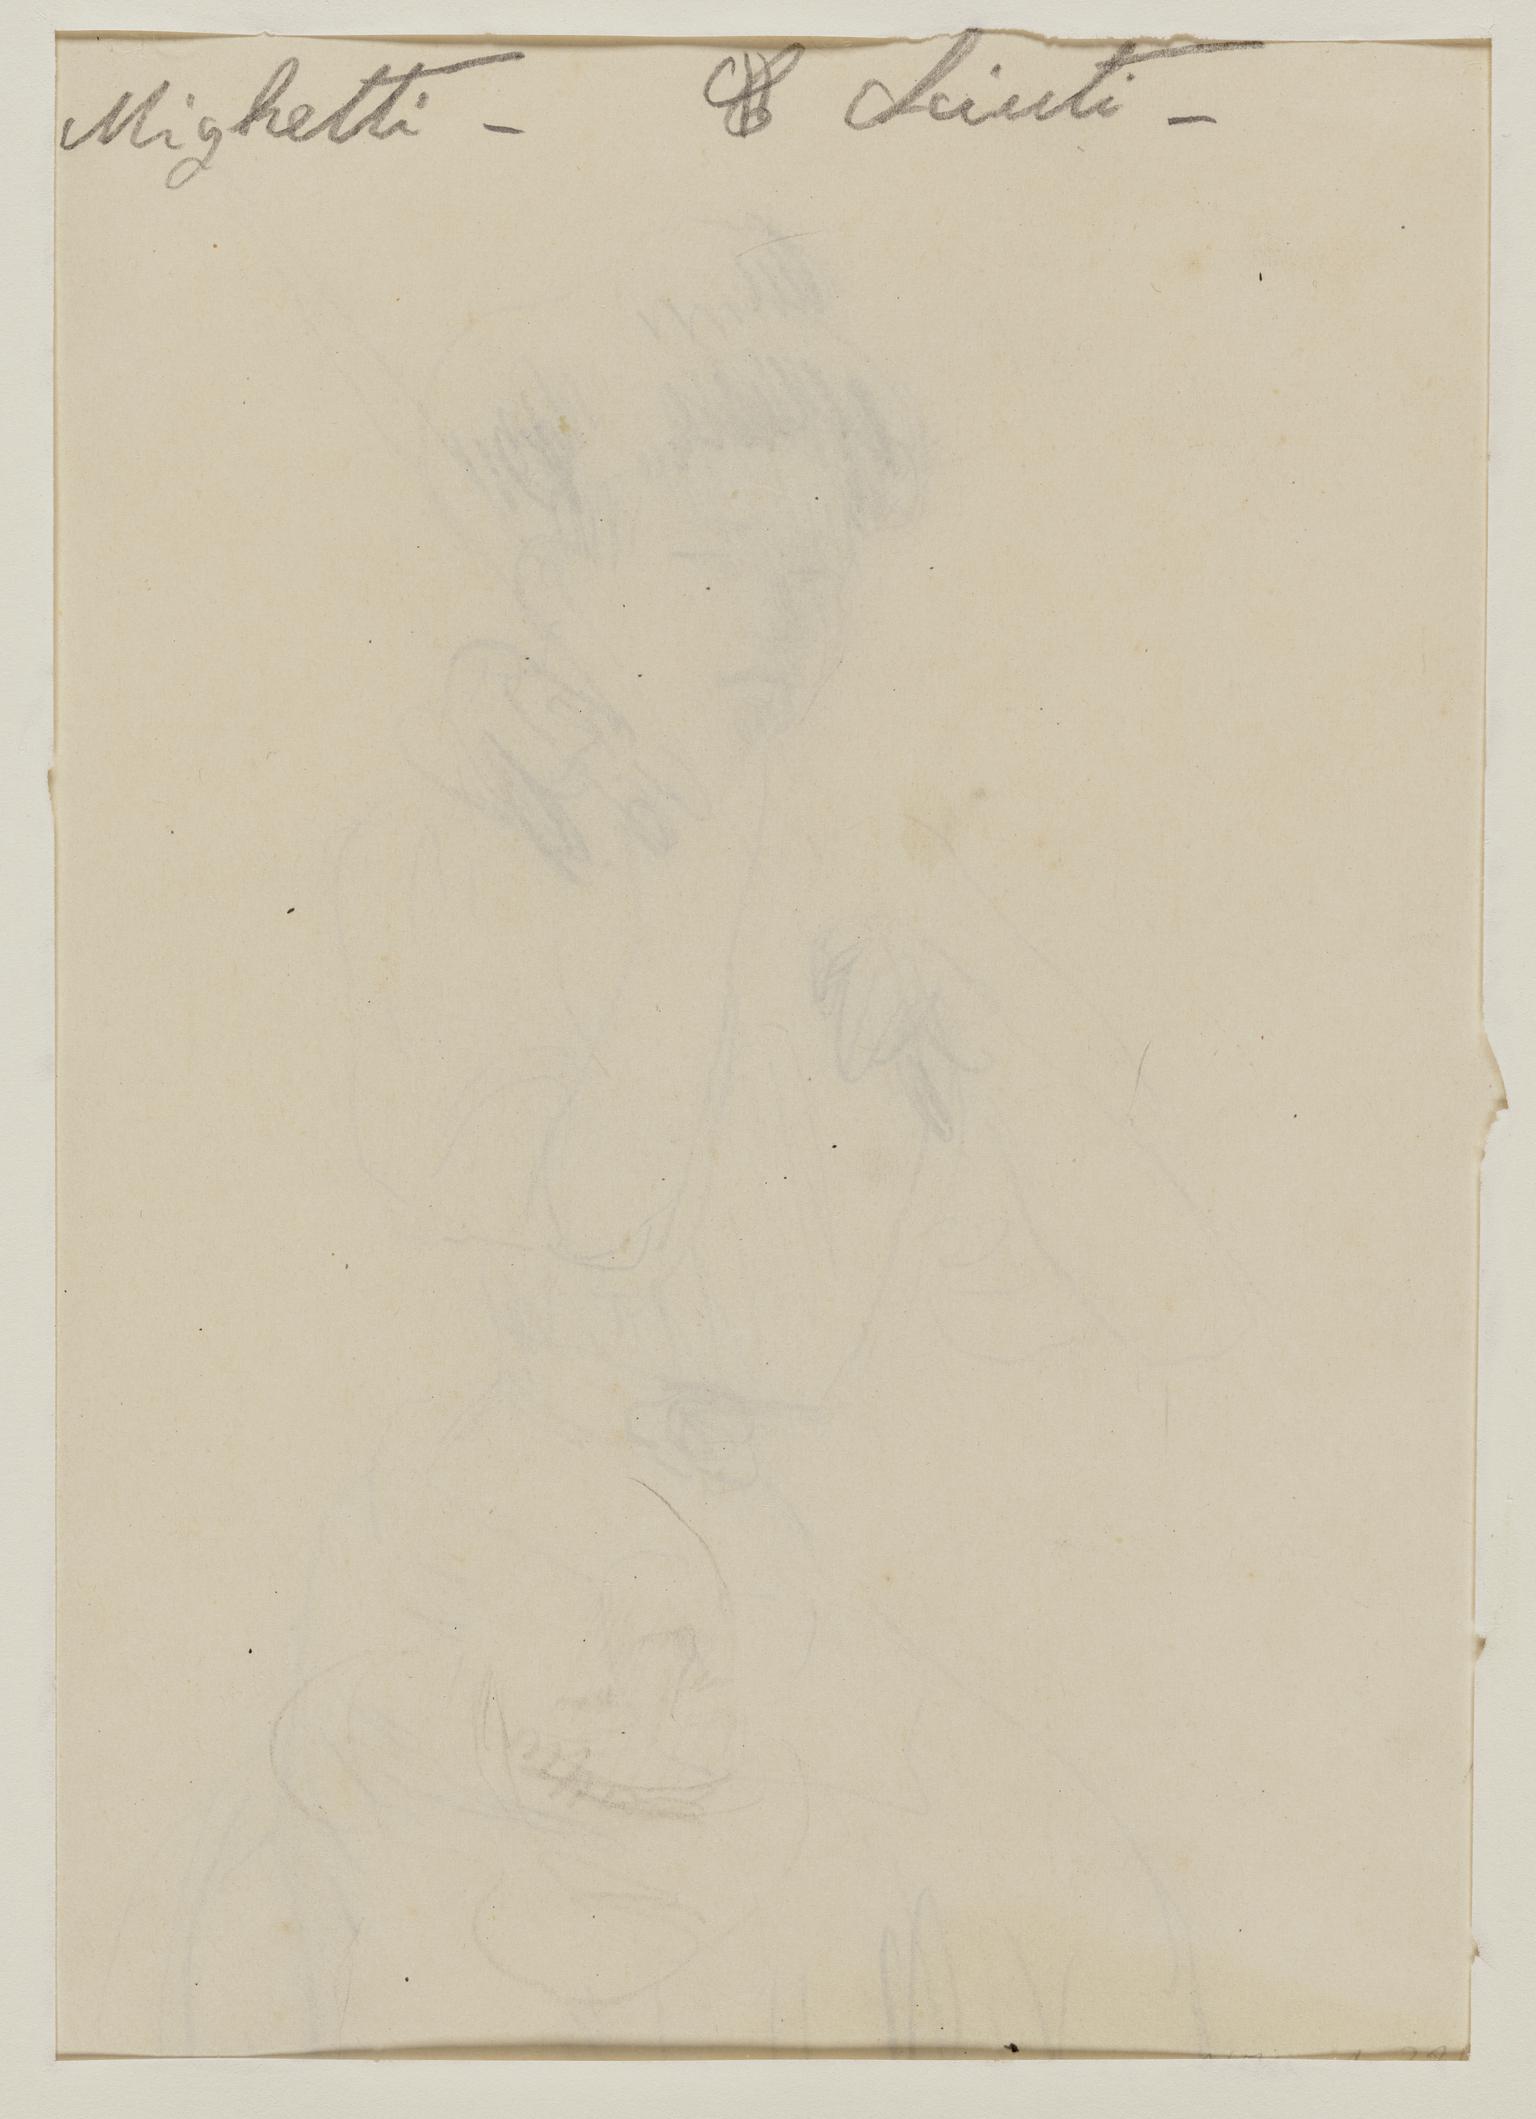 Seated woman playing violin